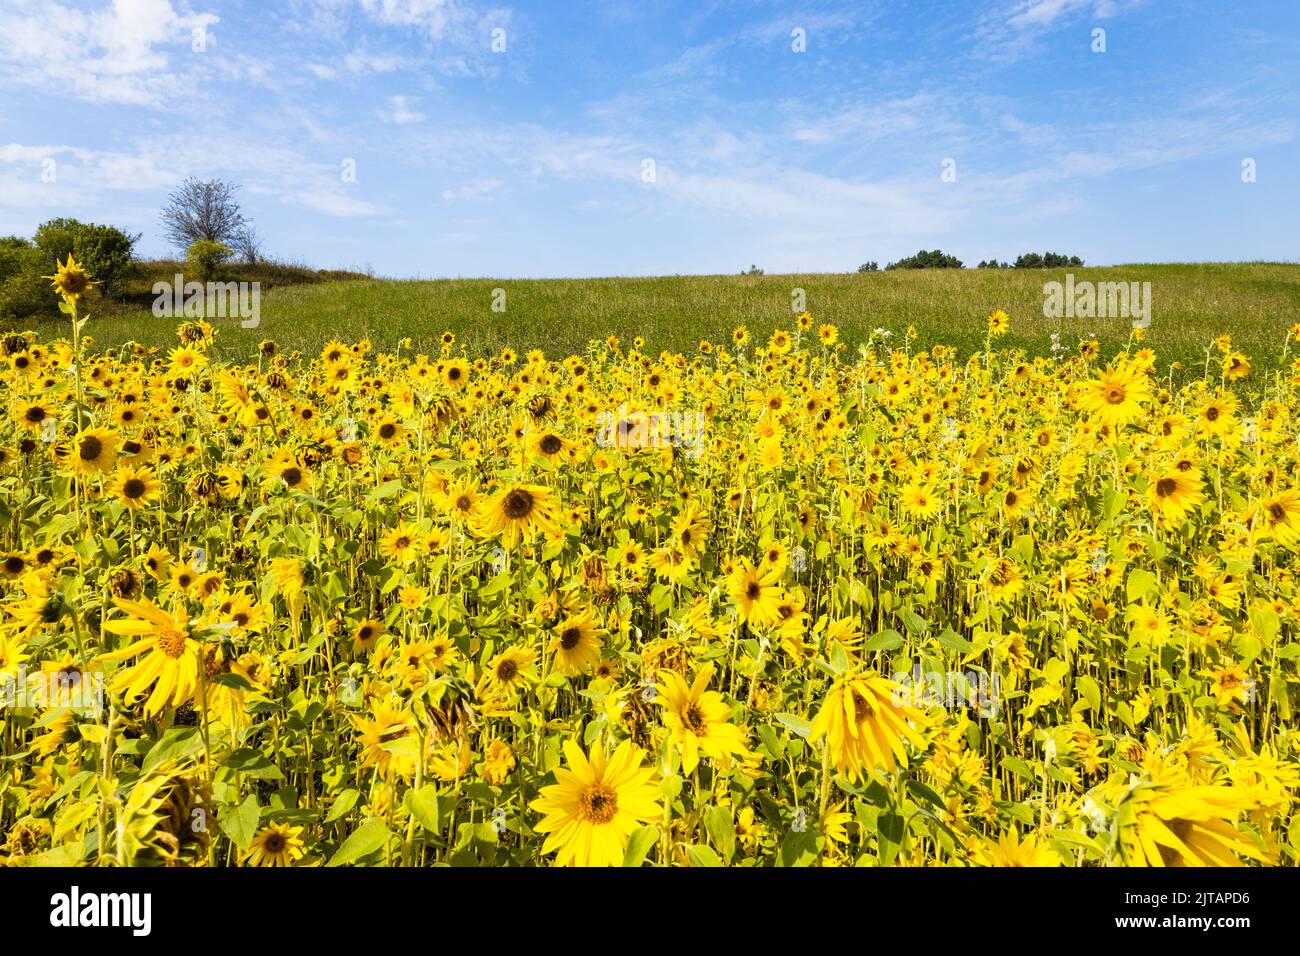 Agricultural field with yellow sunflowers against the sky with clouds Stock Photo